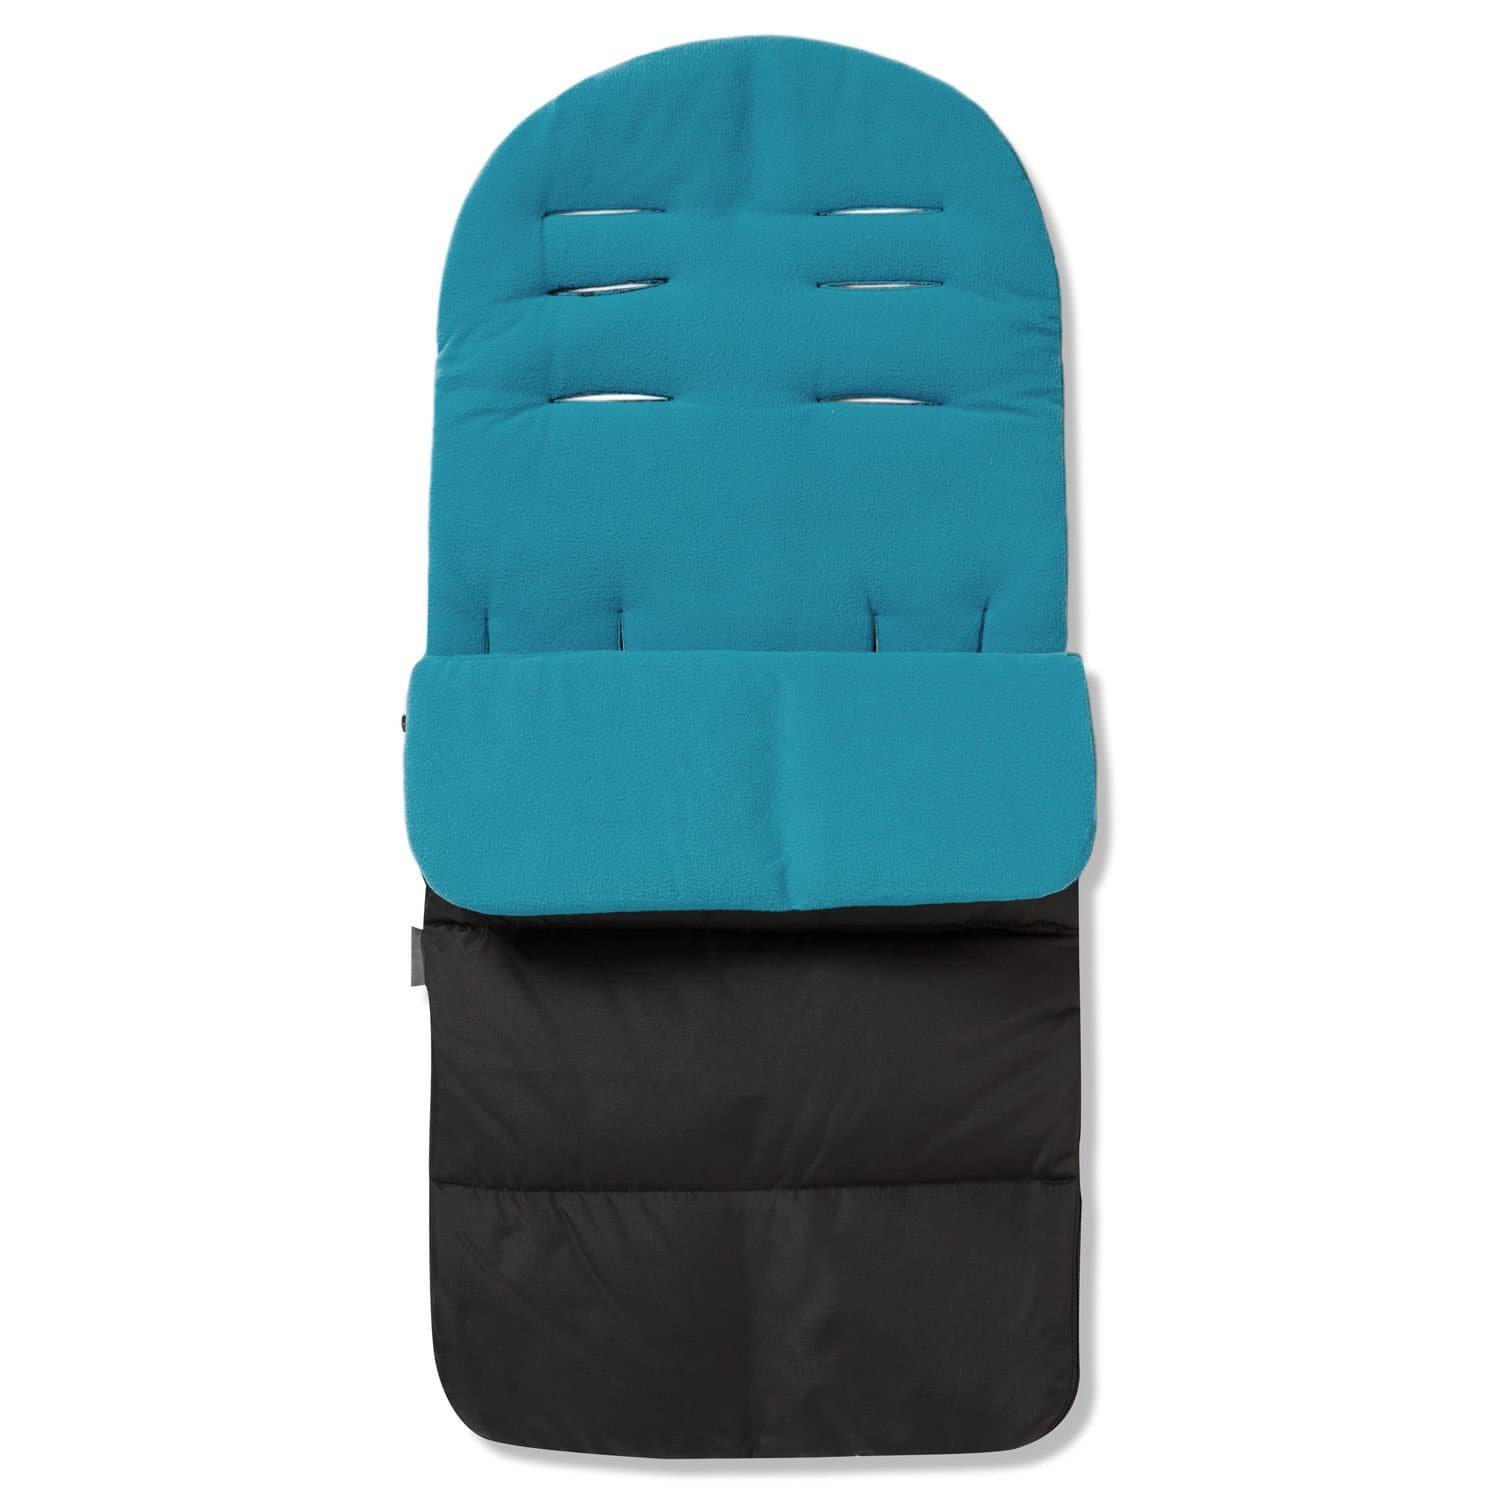 Premium Footmuff / Cosy Toes Compatible with Quinny - For Your Little One